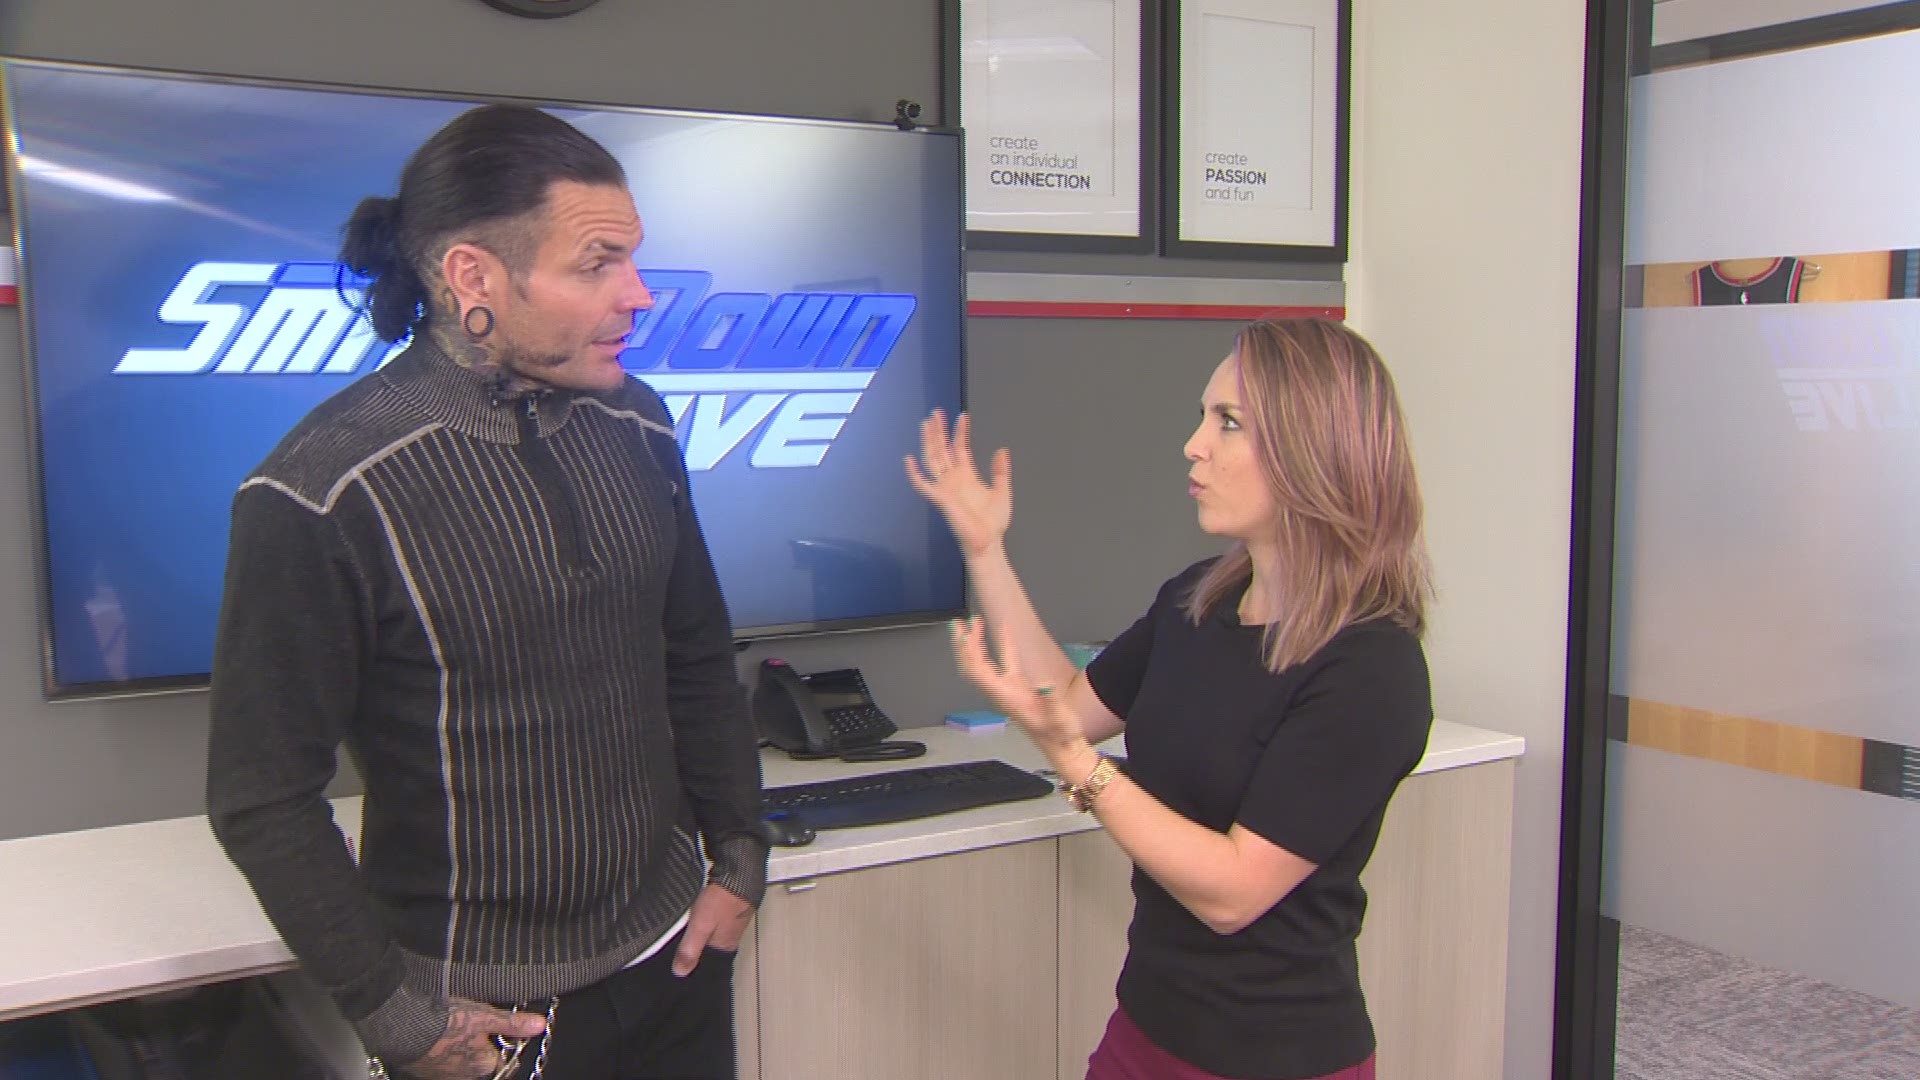 WWE Smackdown Live was in Portland at the Moda Center for one night only, so Cassidy Quinn got a mini conference room wrestling lesson from Jeff Hardy.